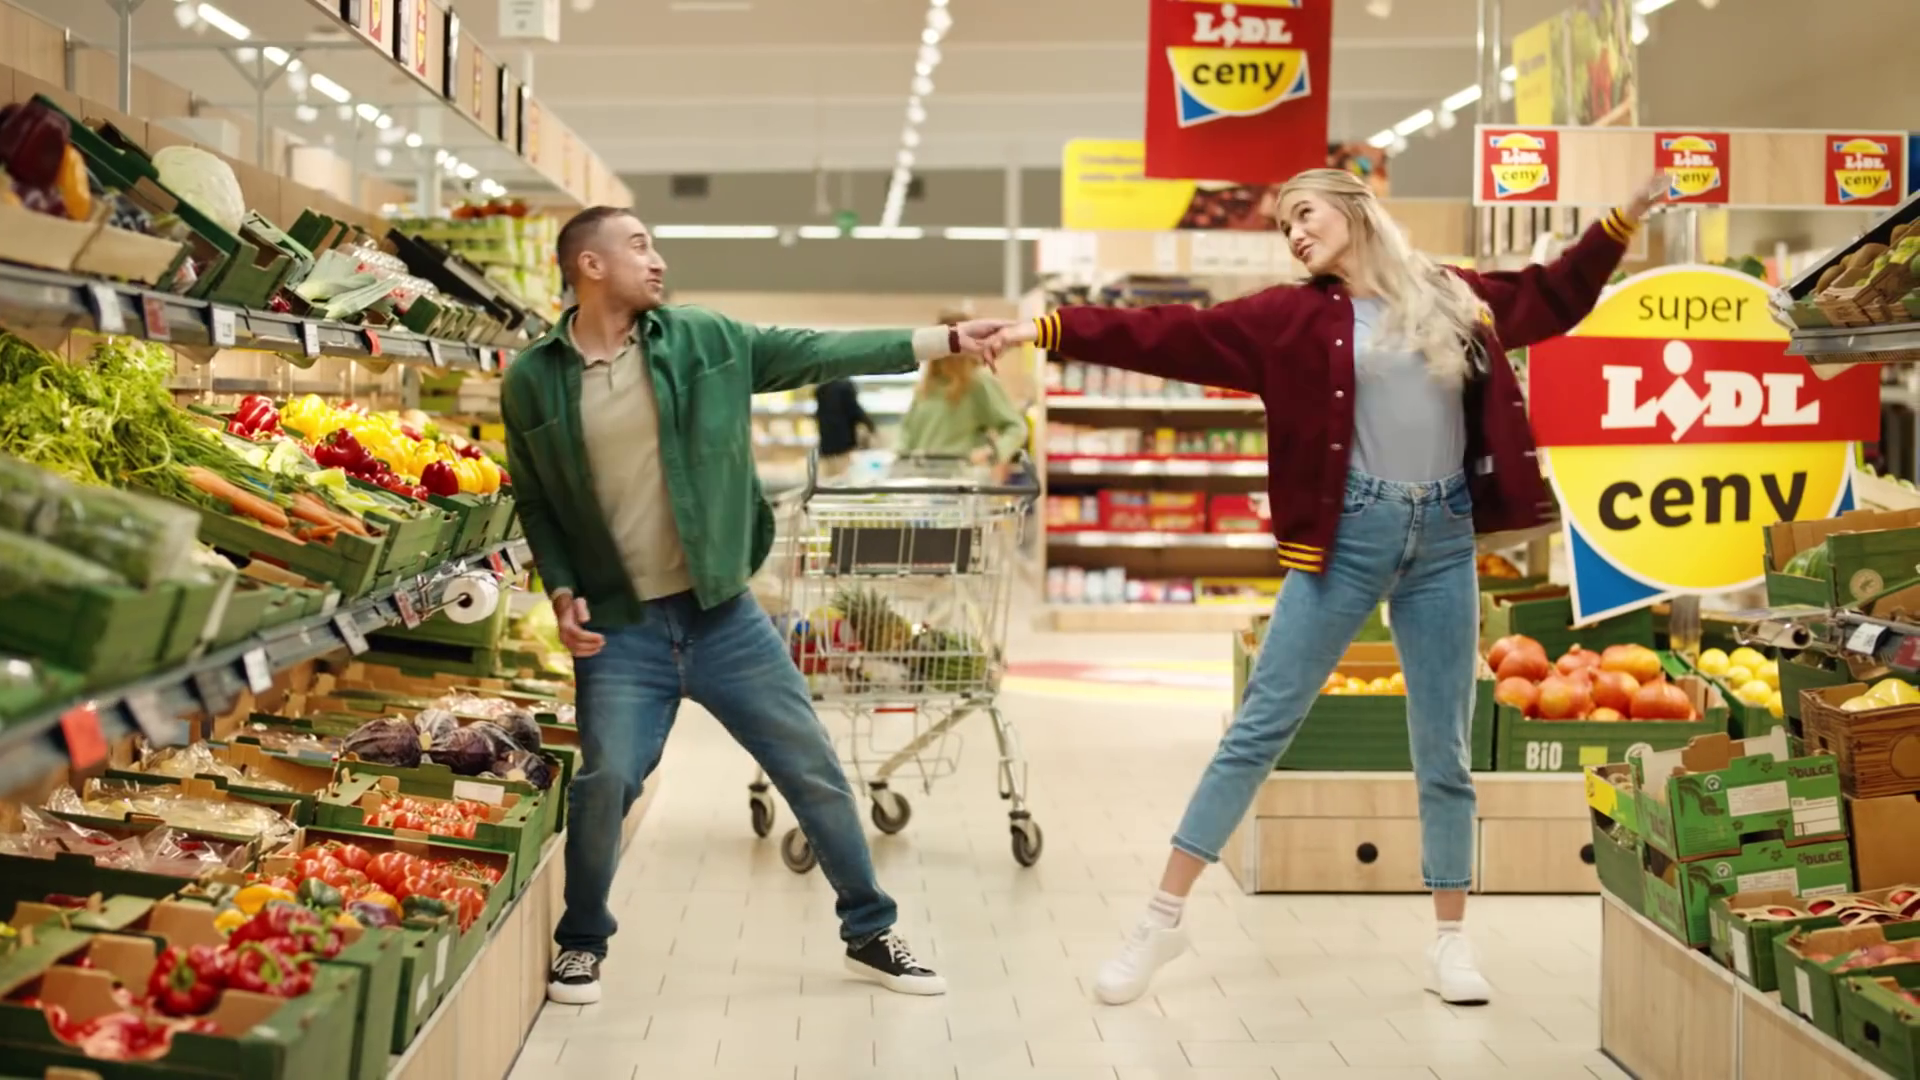 new Lidl ad with famous melody and custom lyrics to Macarena - licensed by Tracks & Fields thumbnail